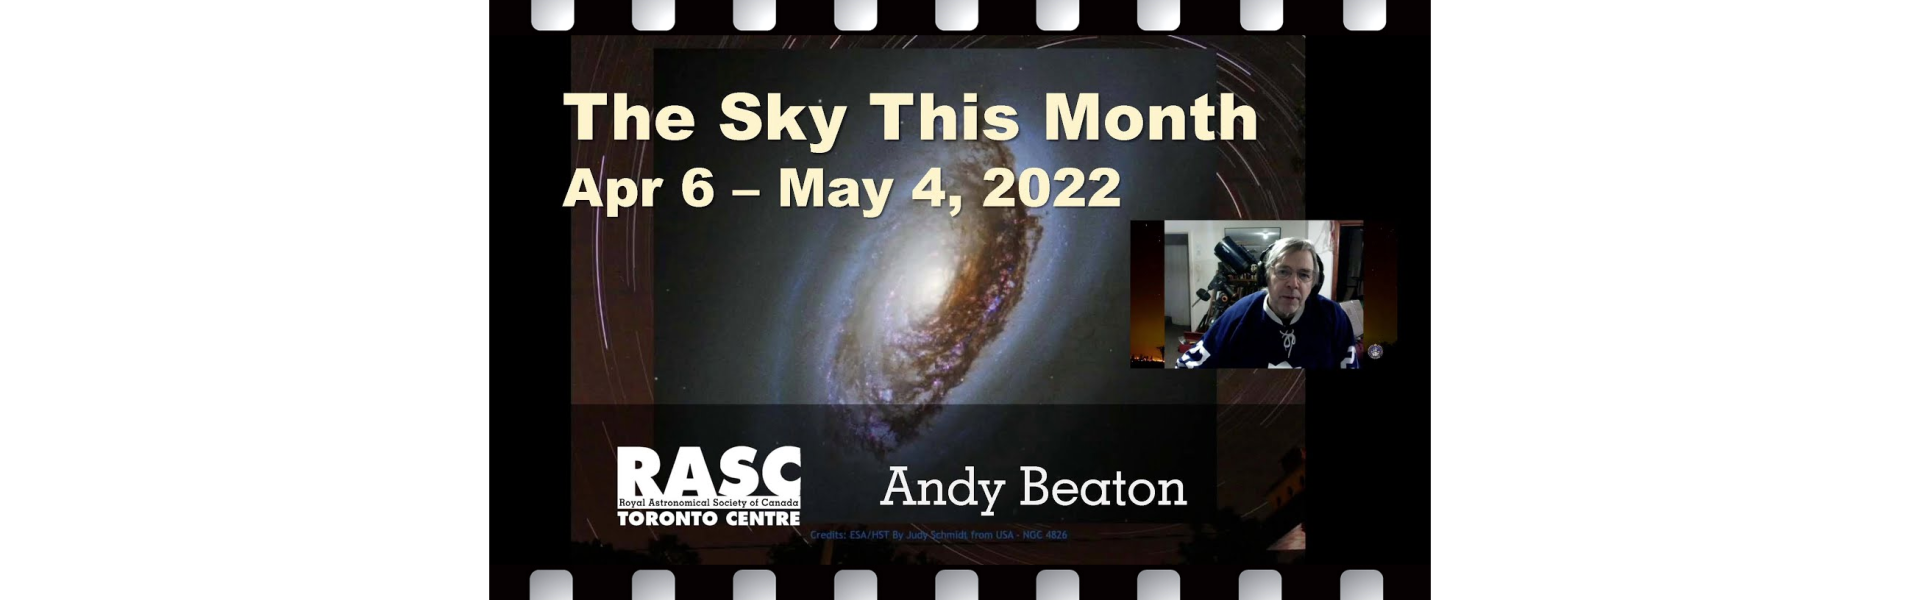 The Sky This Month, Apr 6 - May 4, 2022